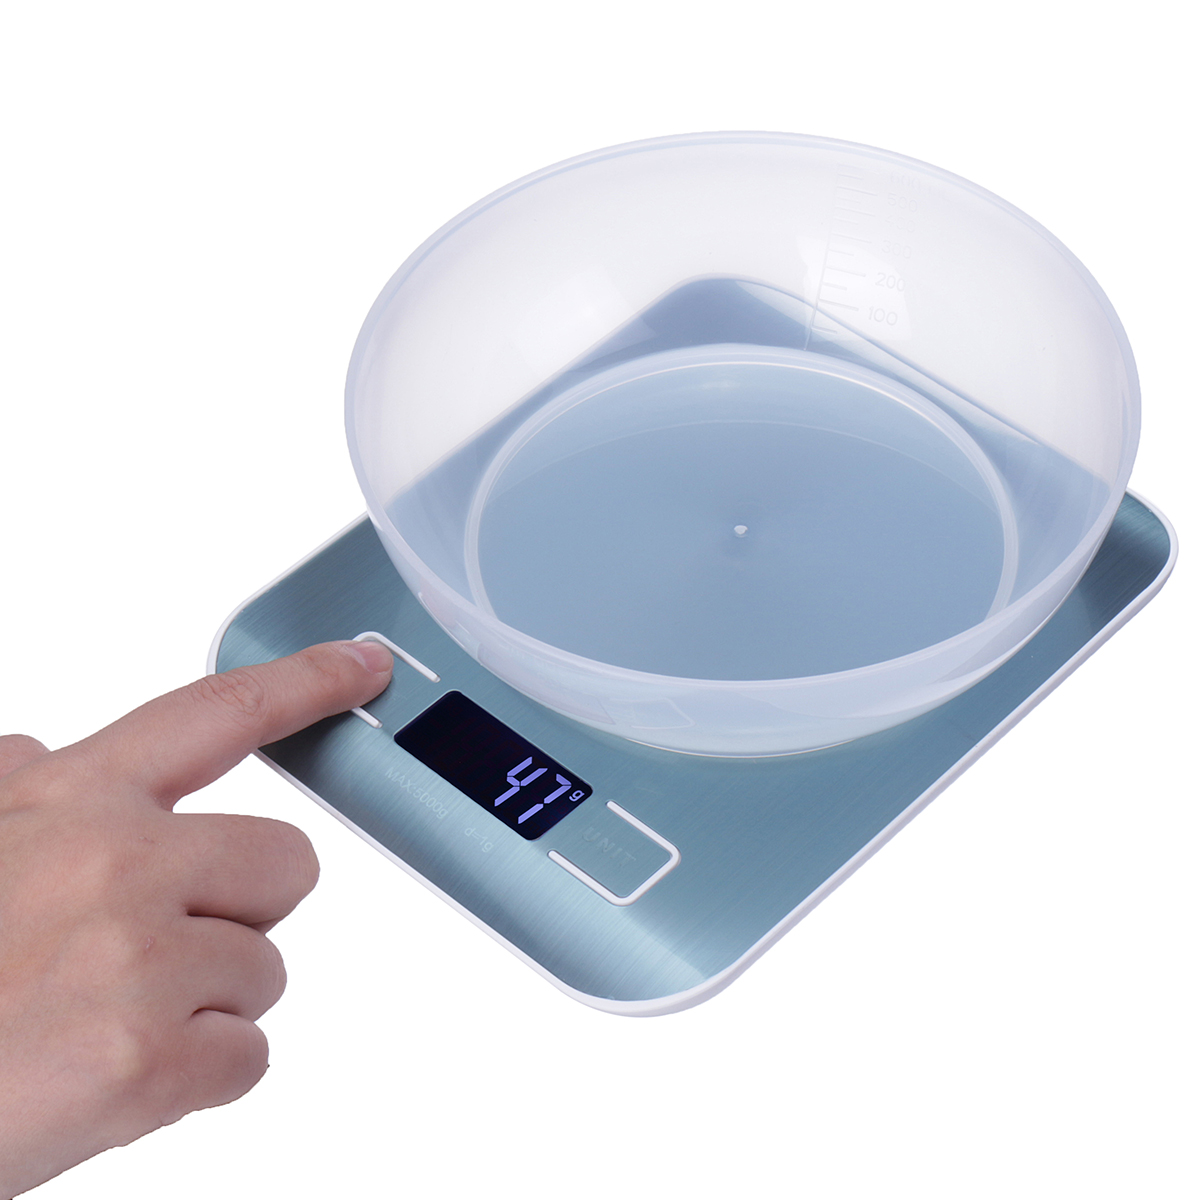 Digital-Kitchen-Scale-5kg1g-10kg1g-Food-Scale-Stainless-Steel-LCD-Display-Kitchen-Baking-Mesuring-To-1582787-4